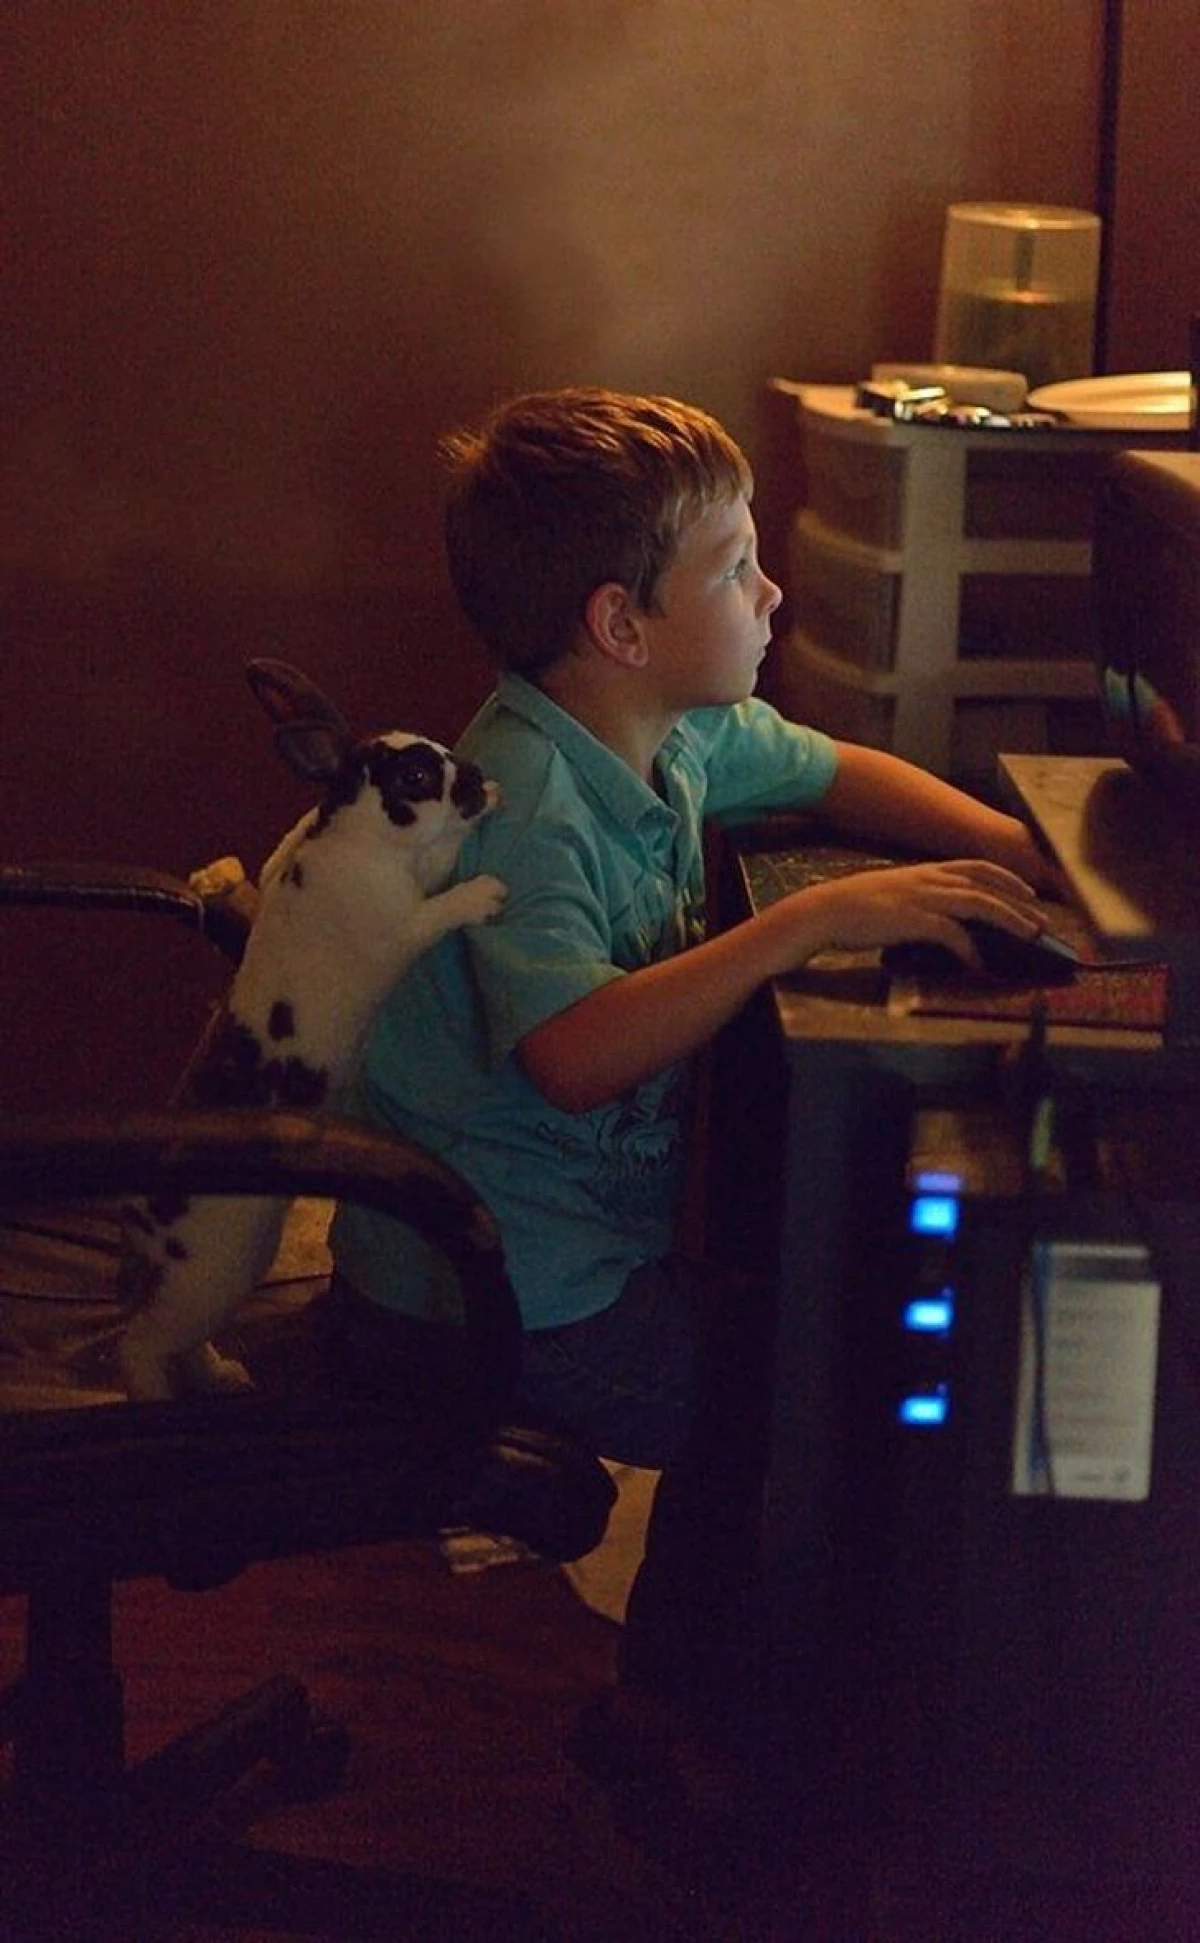 20 photos that prove that children and animals are friends for life 3423_3